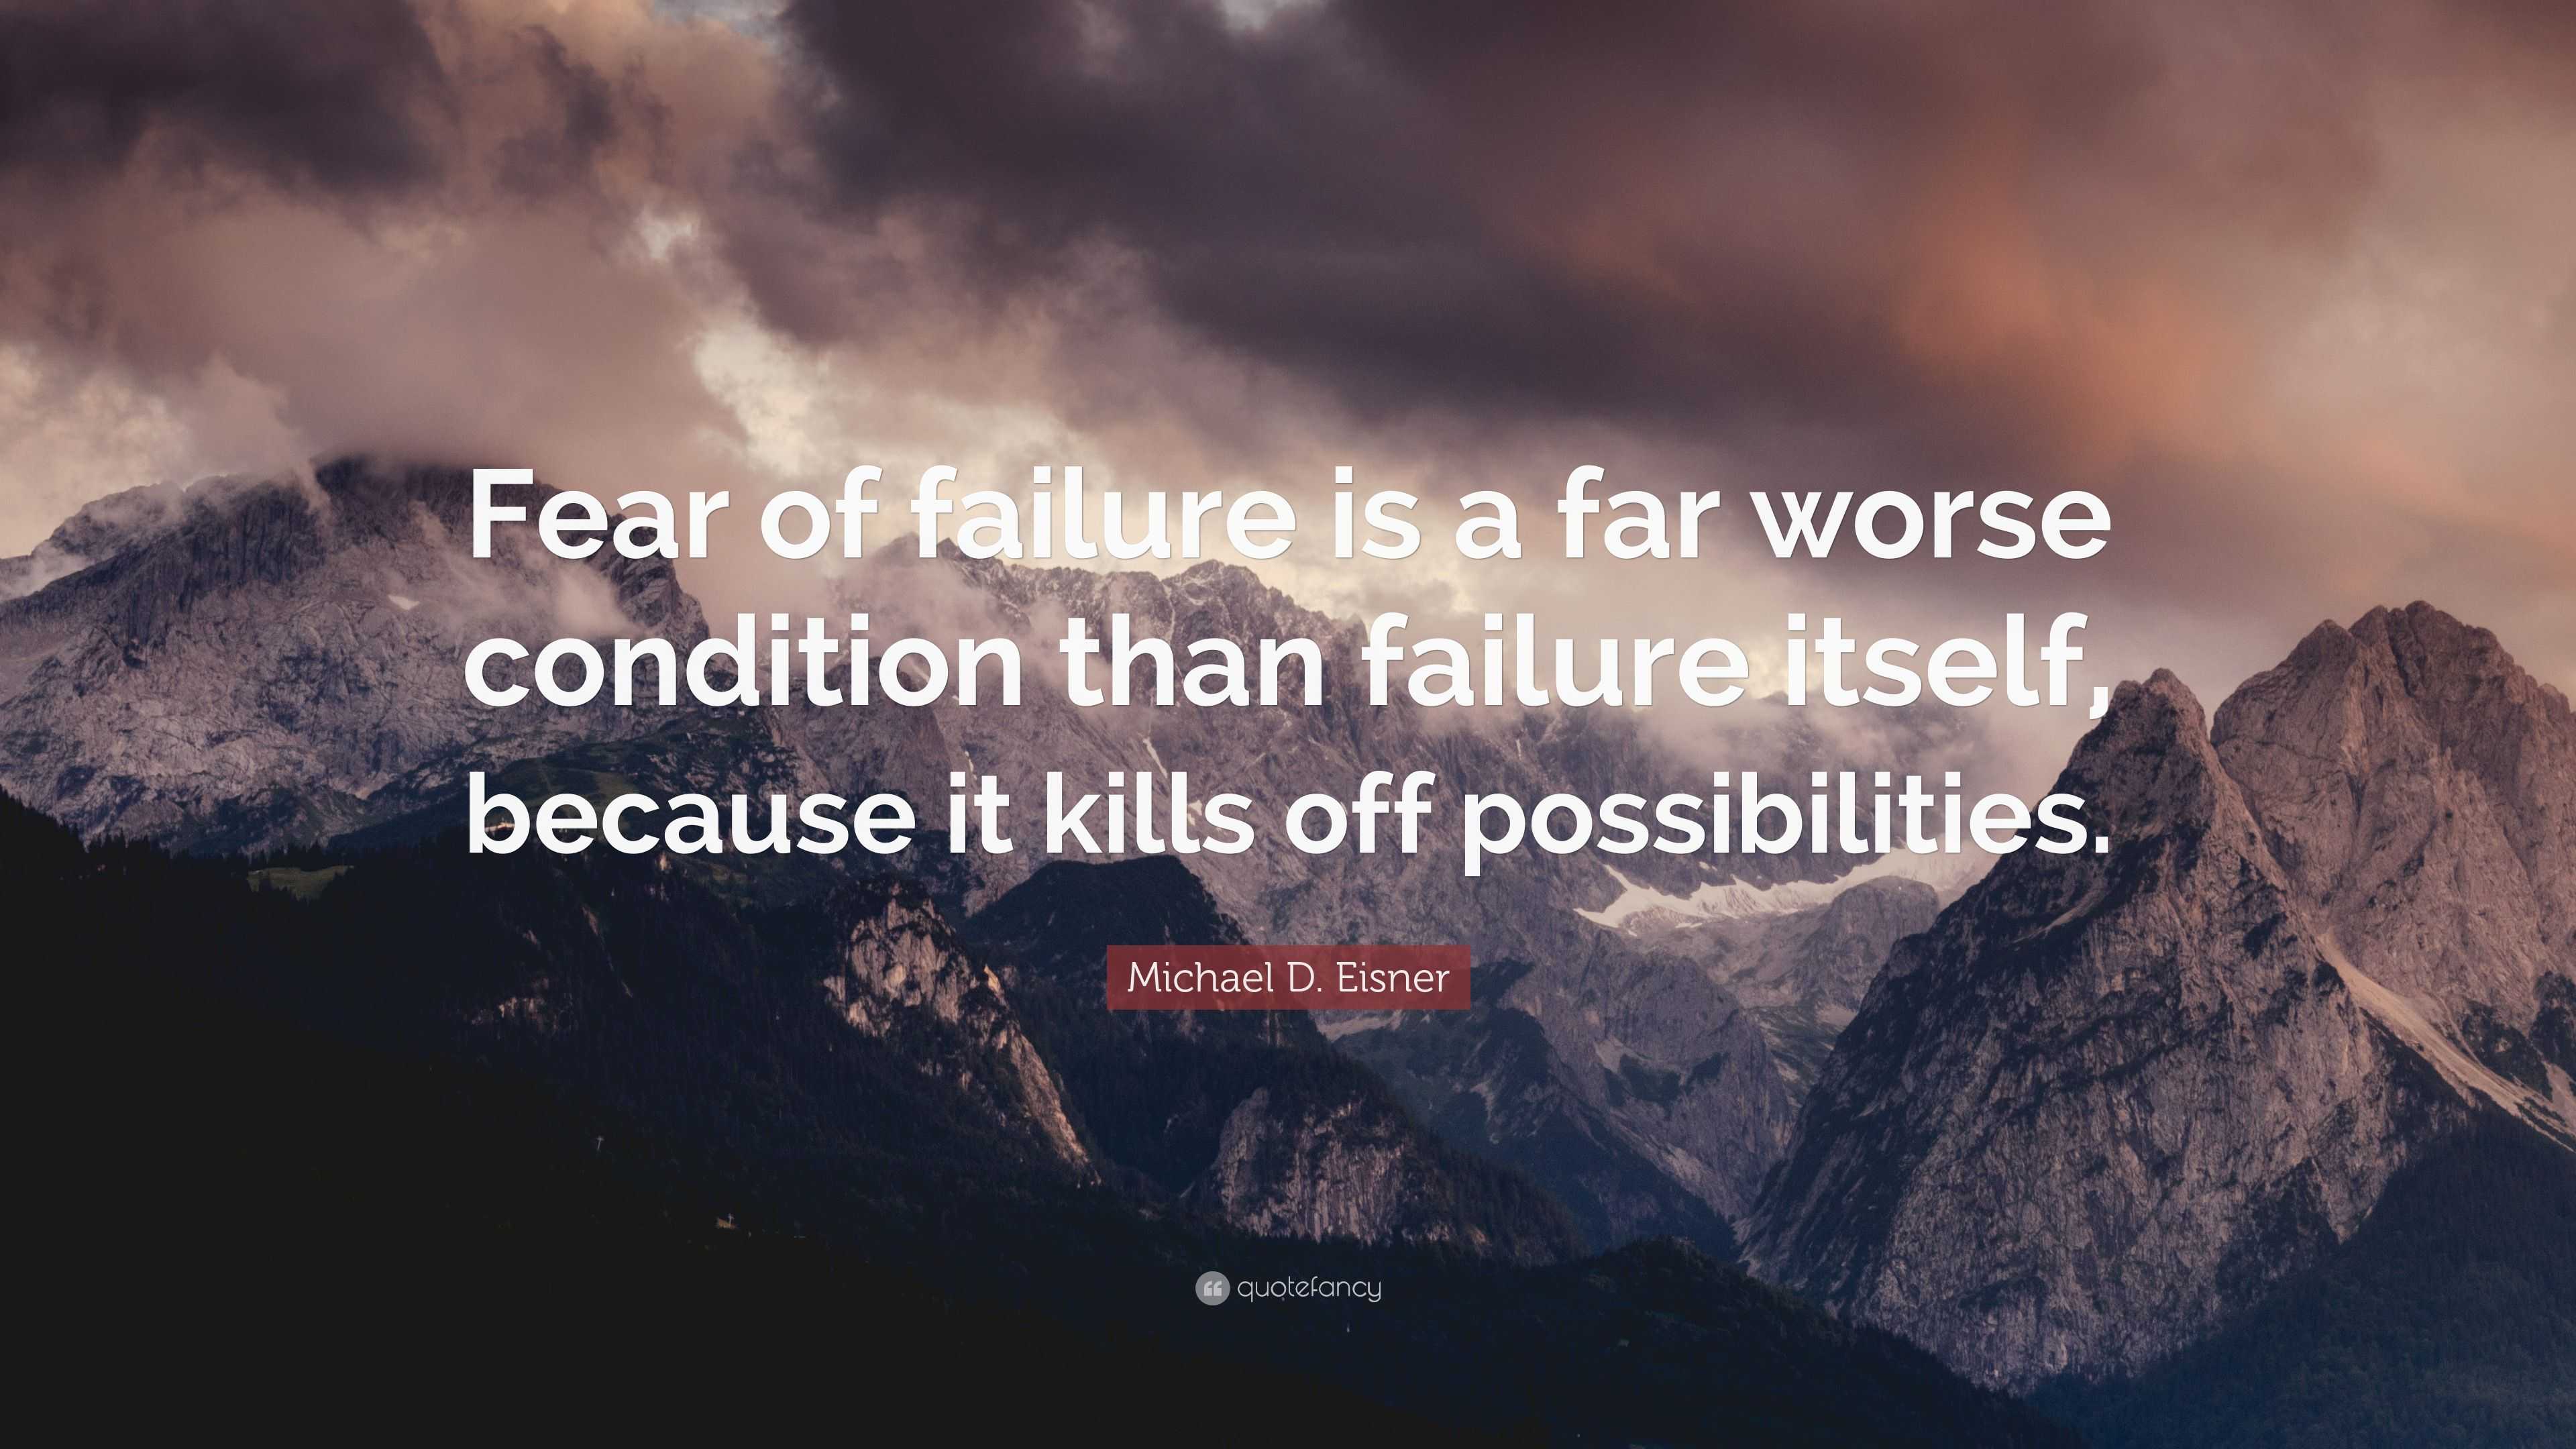 Michael D. Eisner Quote: “Fear of failure is a far worse condition than